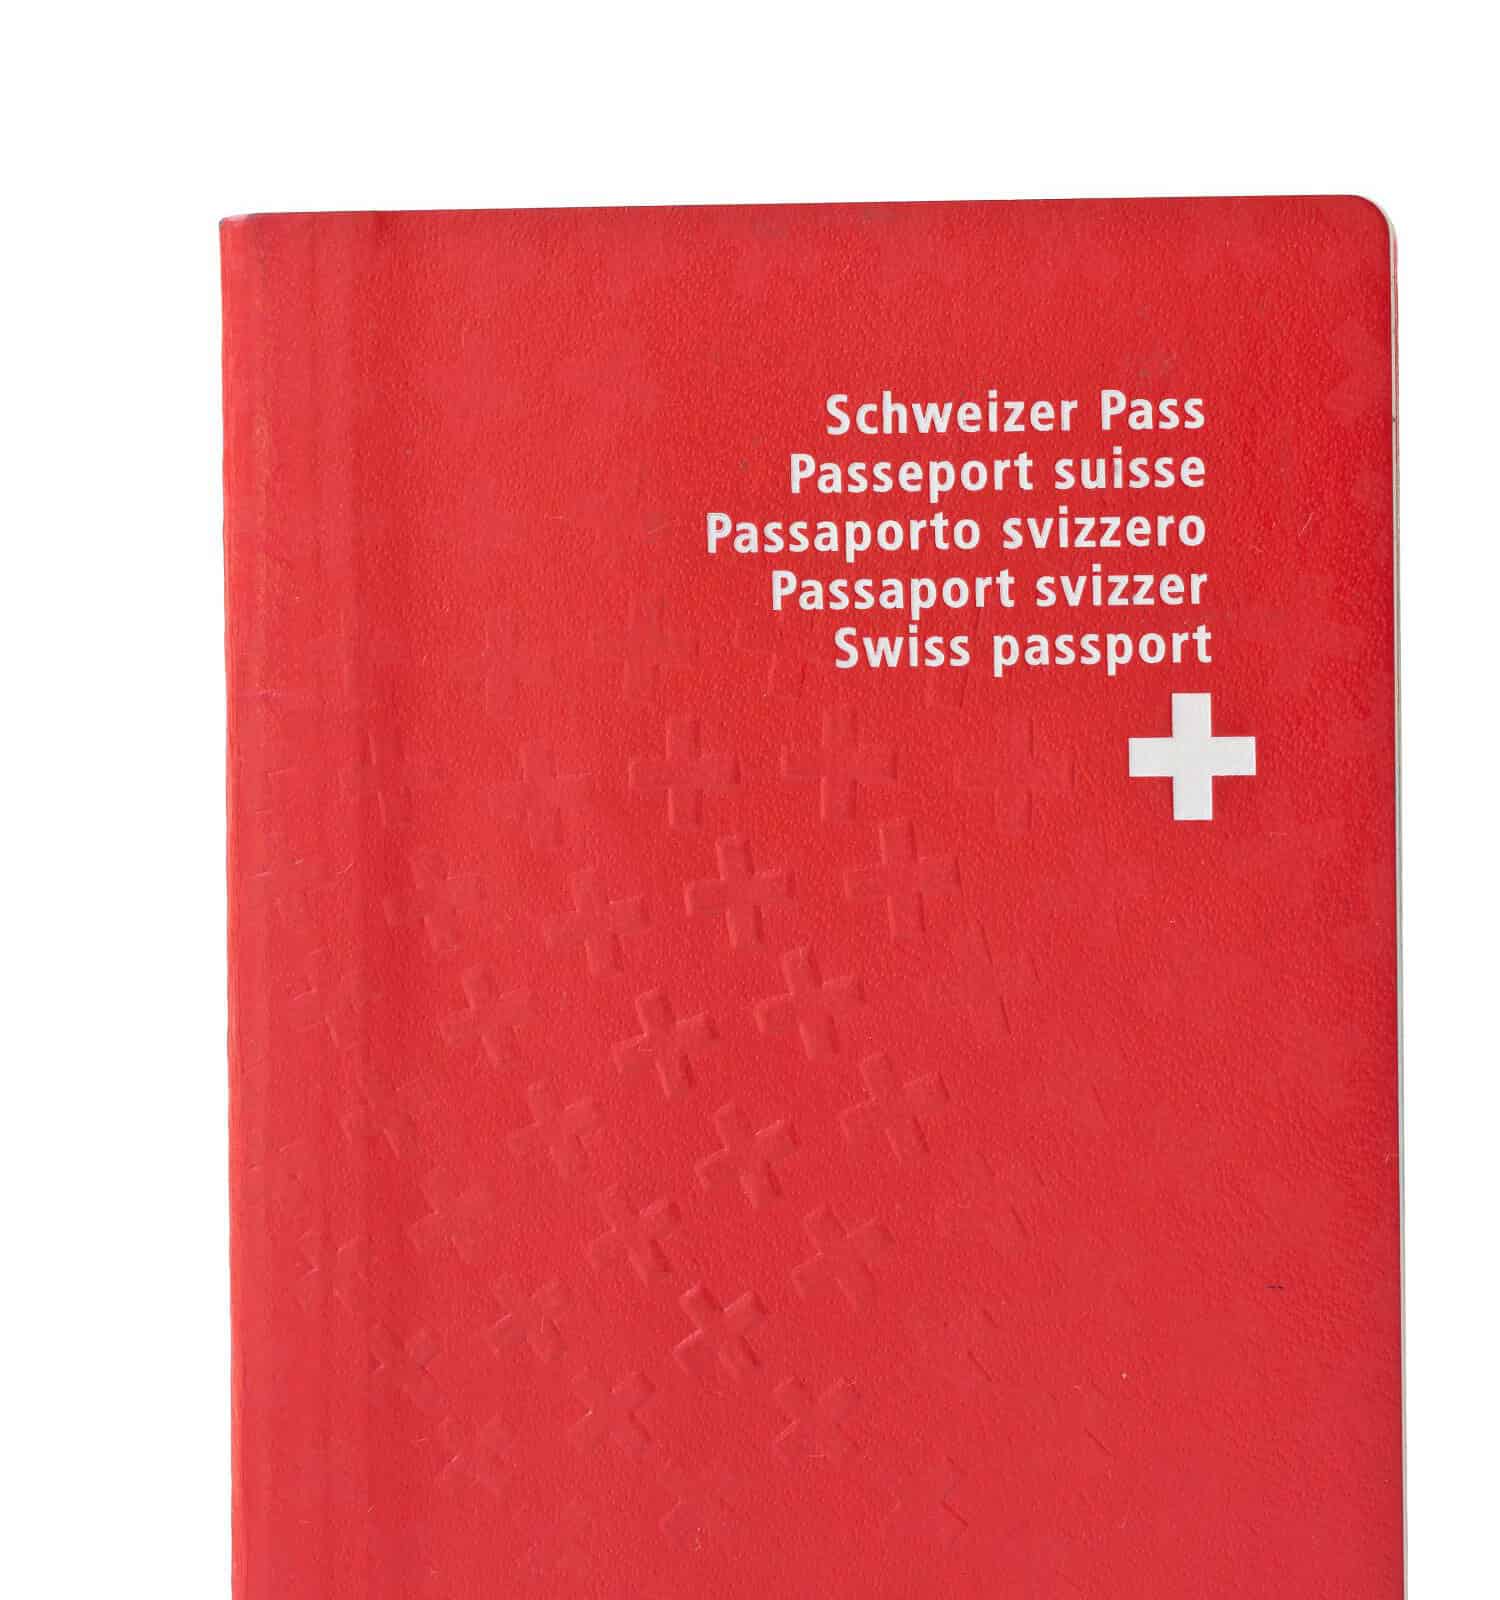 <p>Norway, Portugal, and Switzerland are in 4th place. If you carry one of these passports, you'll have access to 191 countries. Norway and Portugal are NATO members. Switzerland is strictly neutral and its citizens can access countries people from most other nations cannot.</p><p>Sharks, lions, alligators, and more! Don’t miss today’s latest and most exciting animal news. <strong><a href="https://www.msn.com/en-us/channel/source/AZ%20Animals%20US/sr-vid-7etr9q8xun6k6508c3nufaum0de3dqktiq6h27ddeagnfug30wka">Click here to access the A-Z Animals profile page</a> and be sure to hit the <em>Follow</em> button here or at the top of this article!</strong></p> <p>Have feedback? Add a comment below!</p>